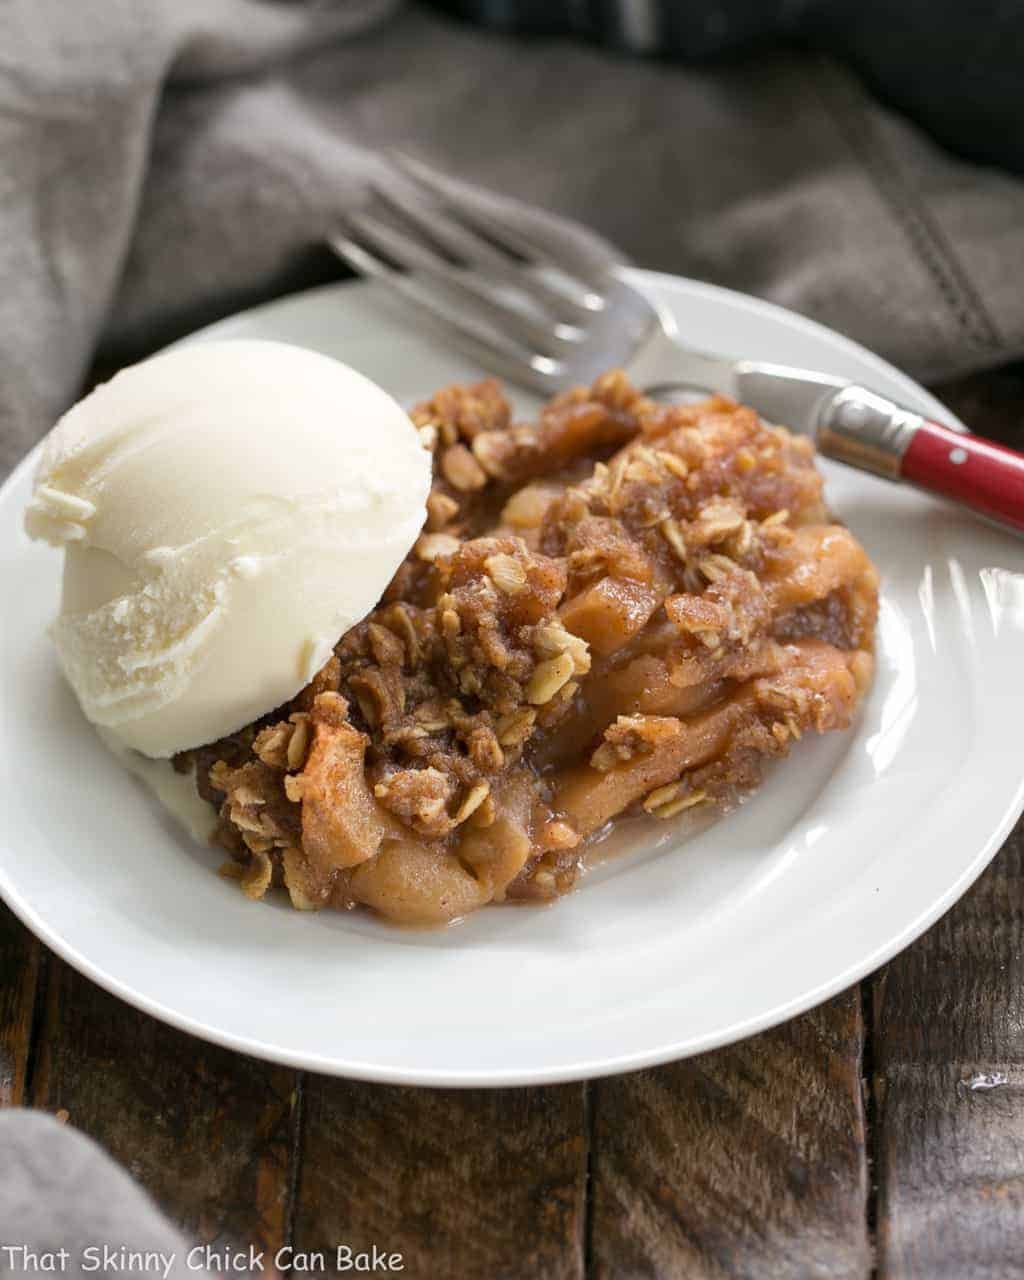 Welcome in the fall season with this simple apple pie inspired crockpo